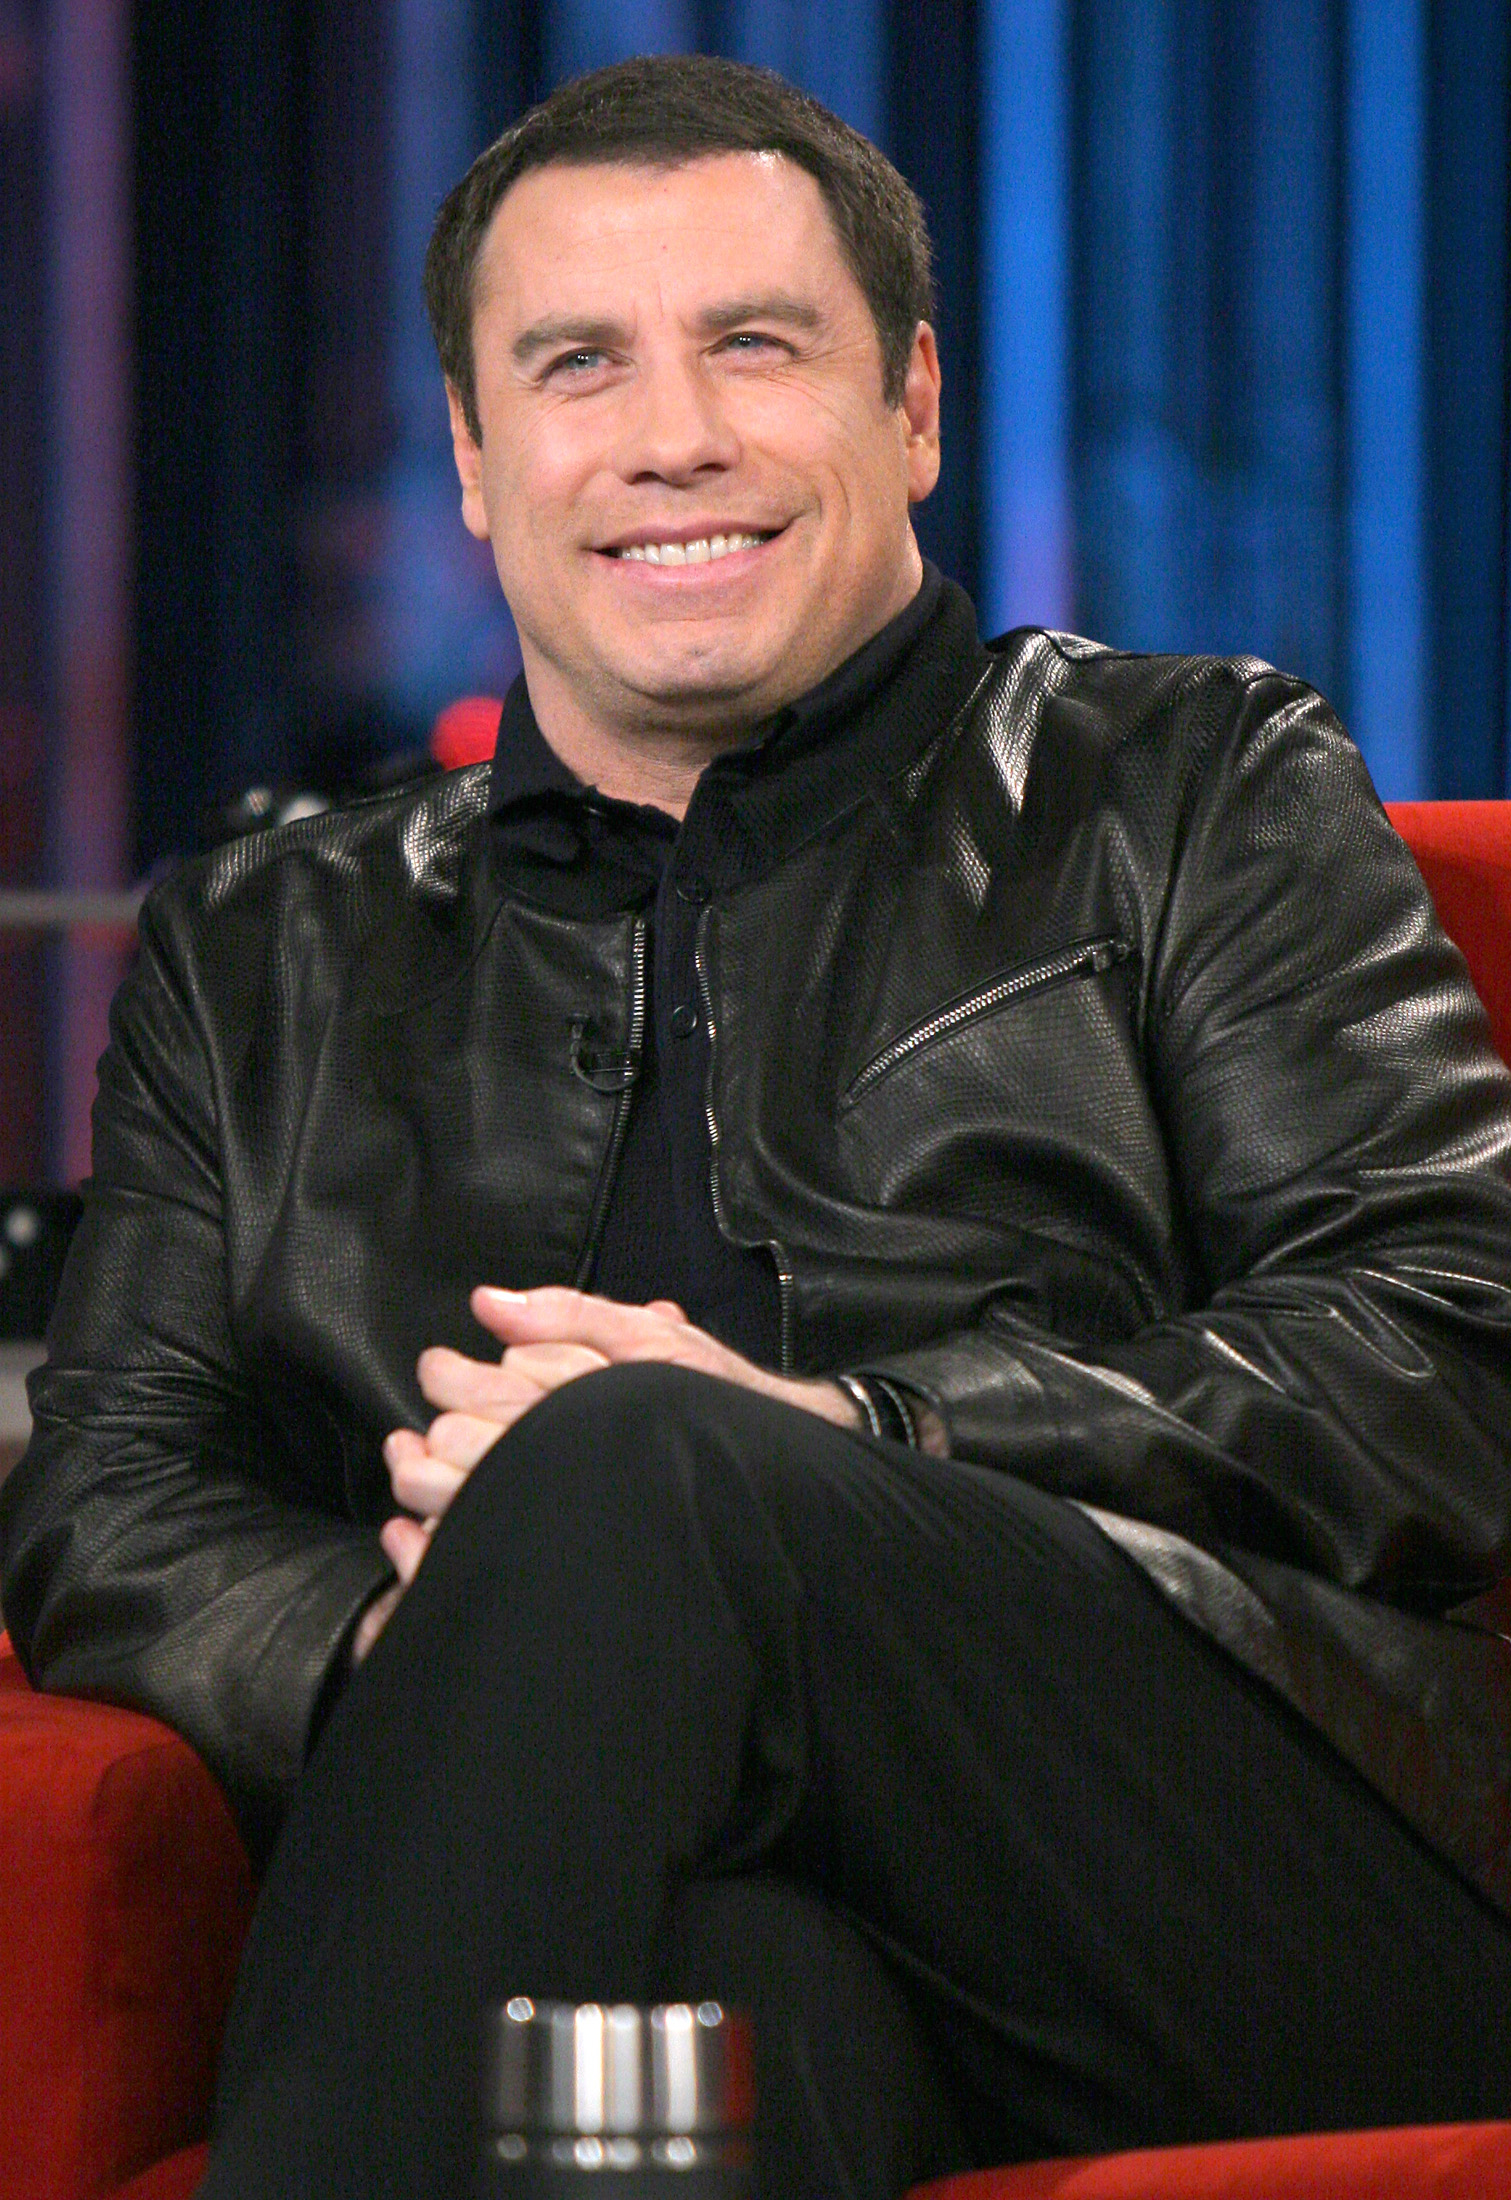 Actor John Travolta smiles during the tapping of 'Last Call with Carson Daly' in New York, February 23, 2005. Travolta is promoting his new comedy film 'Be Cool' which opens March 4 in the United States. REUTERS/Albert Ferreira AF